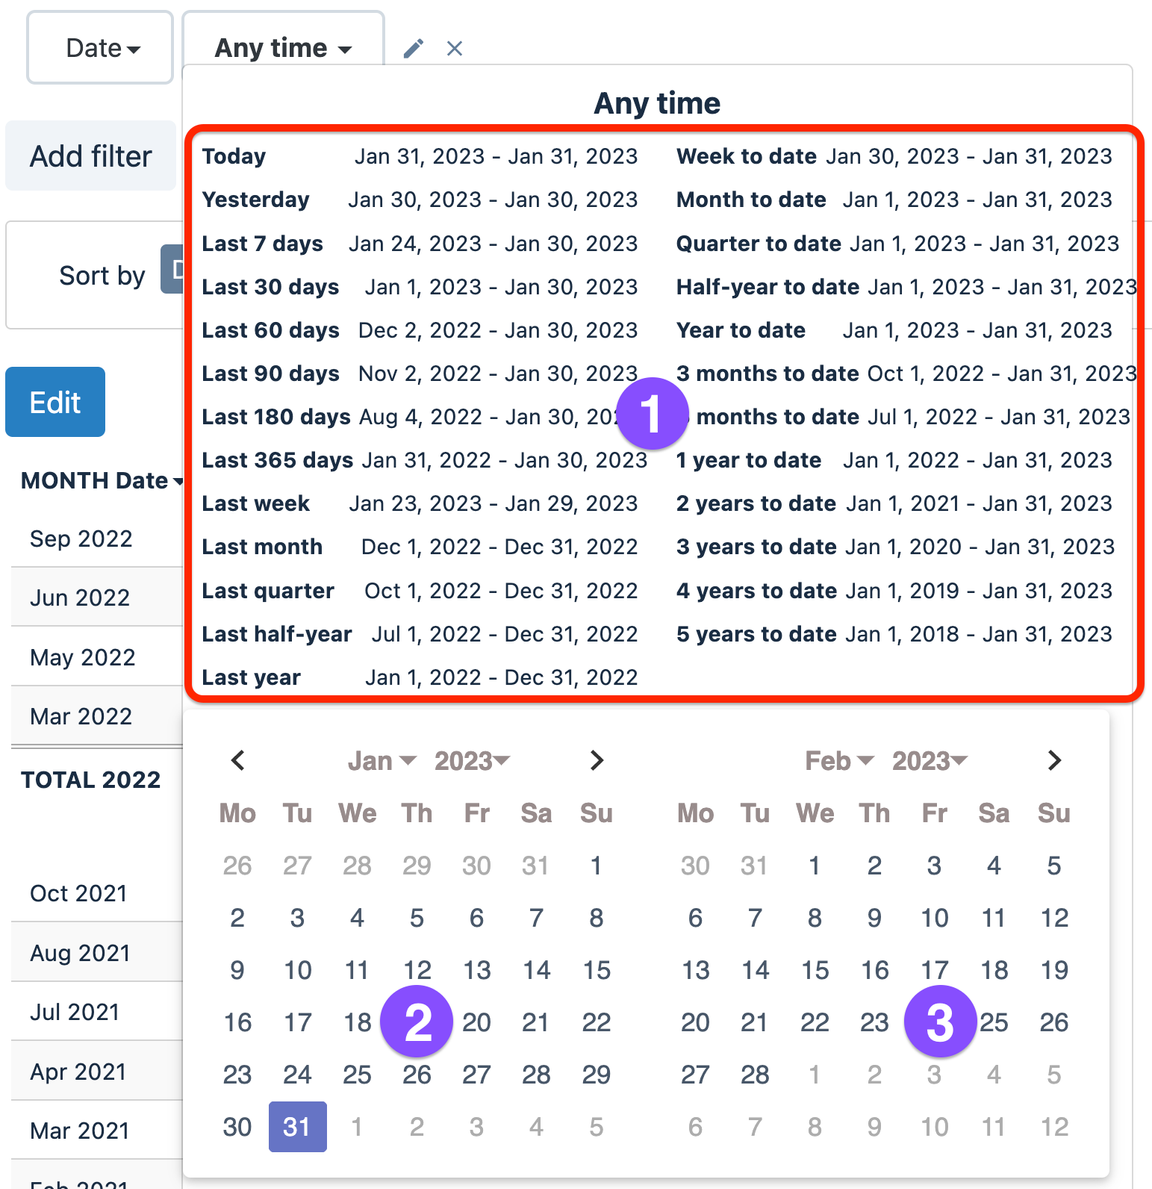 Filter by dynamic or fixed date range